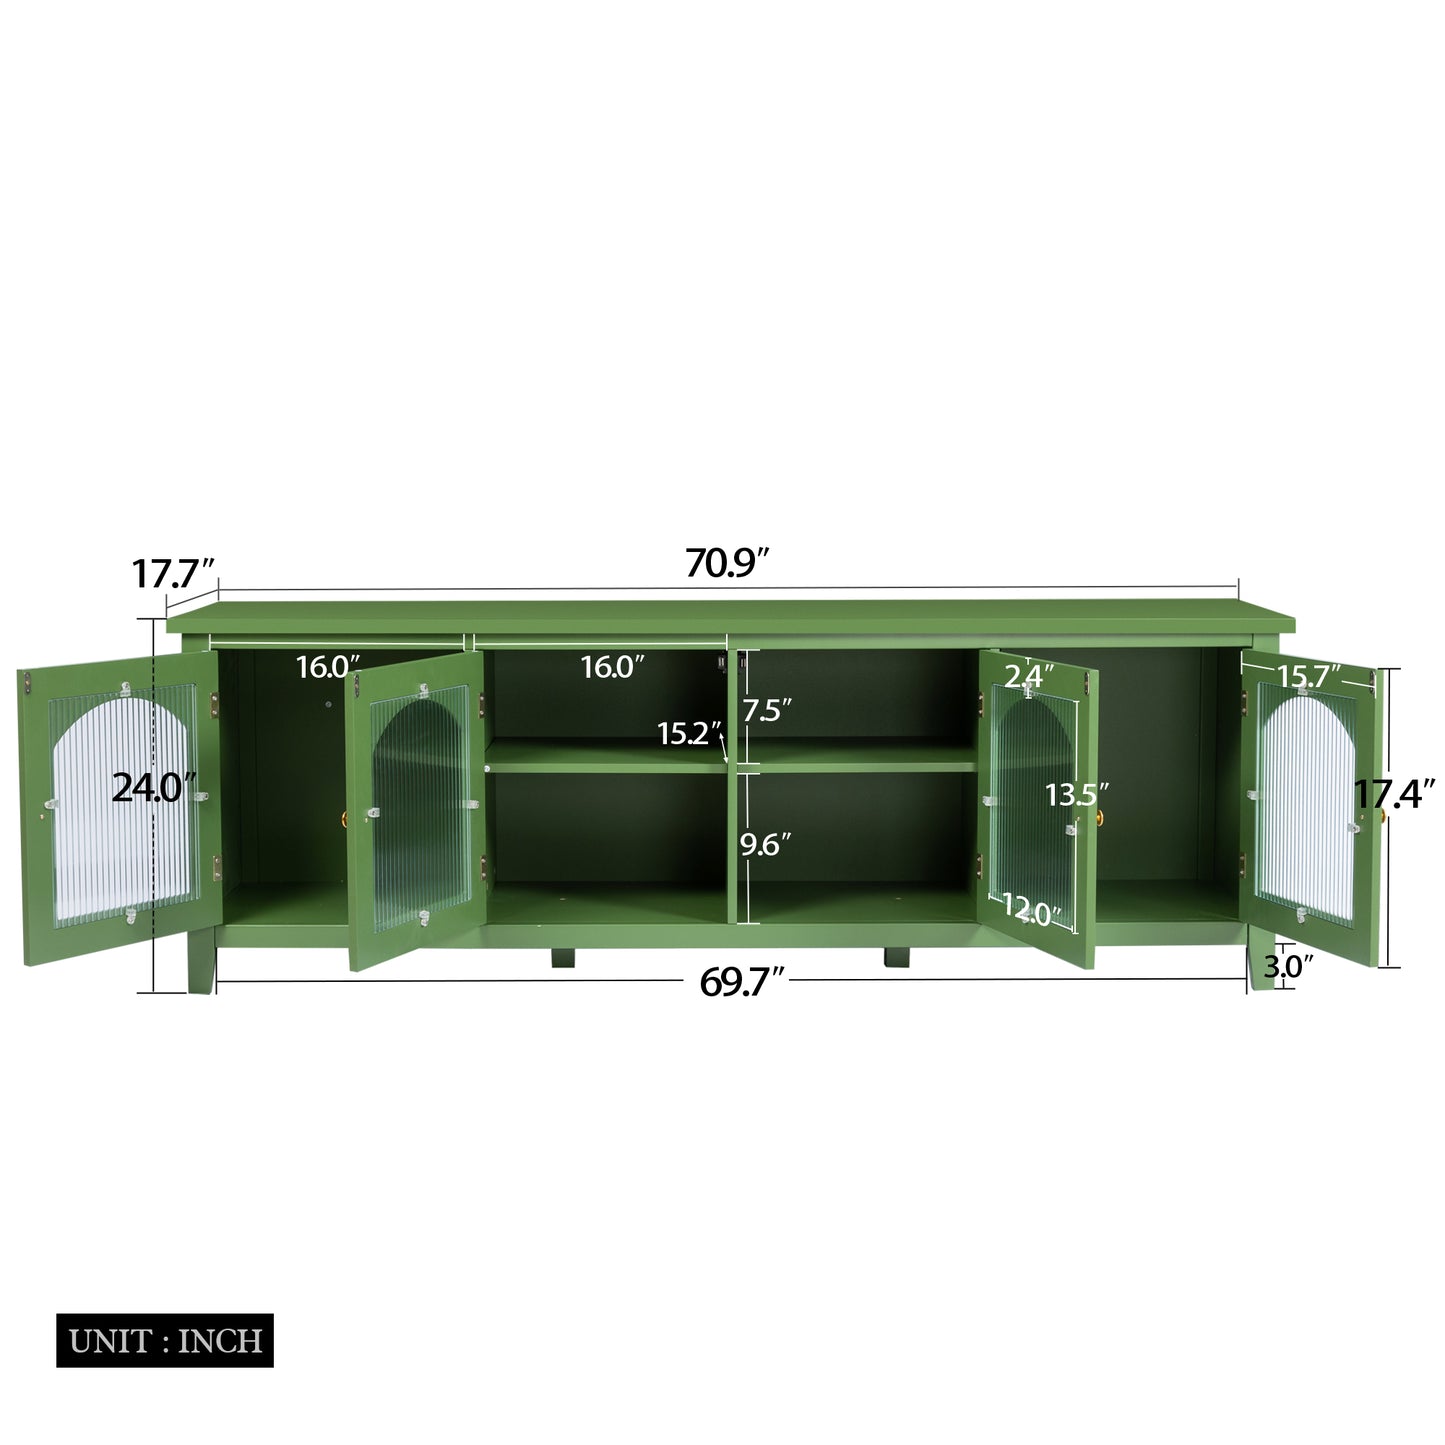 TV Media Console for 70 inch TVs, HSUNNS Modern Green TV Stand with Glass Door and Storage Cabinet, Entertainment Center for Living Room Bedroom, Size: 70.87(L) x 17.72(W) x 24.02(H)